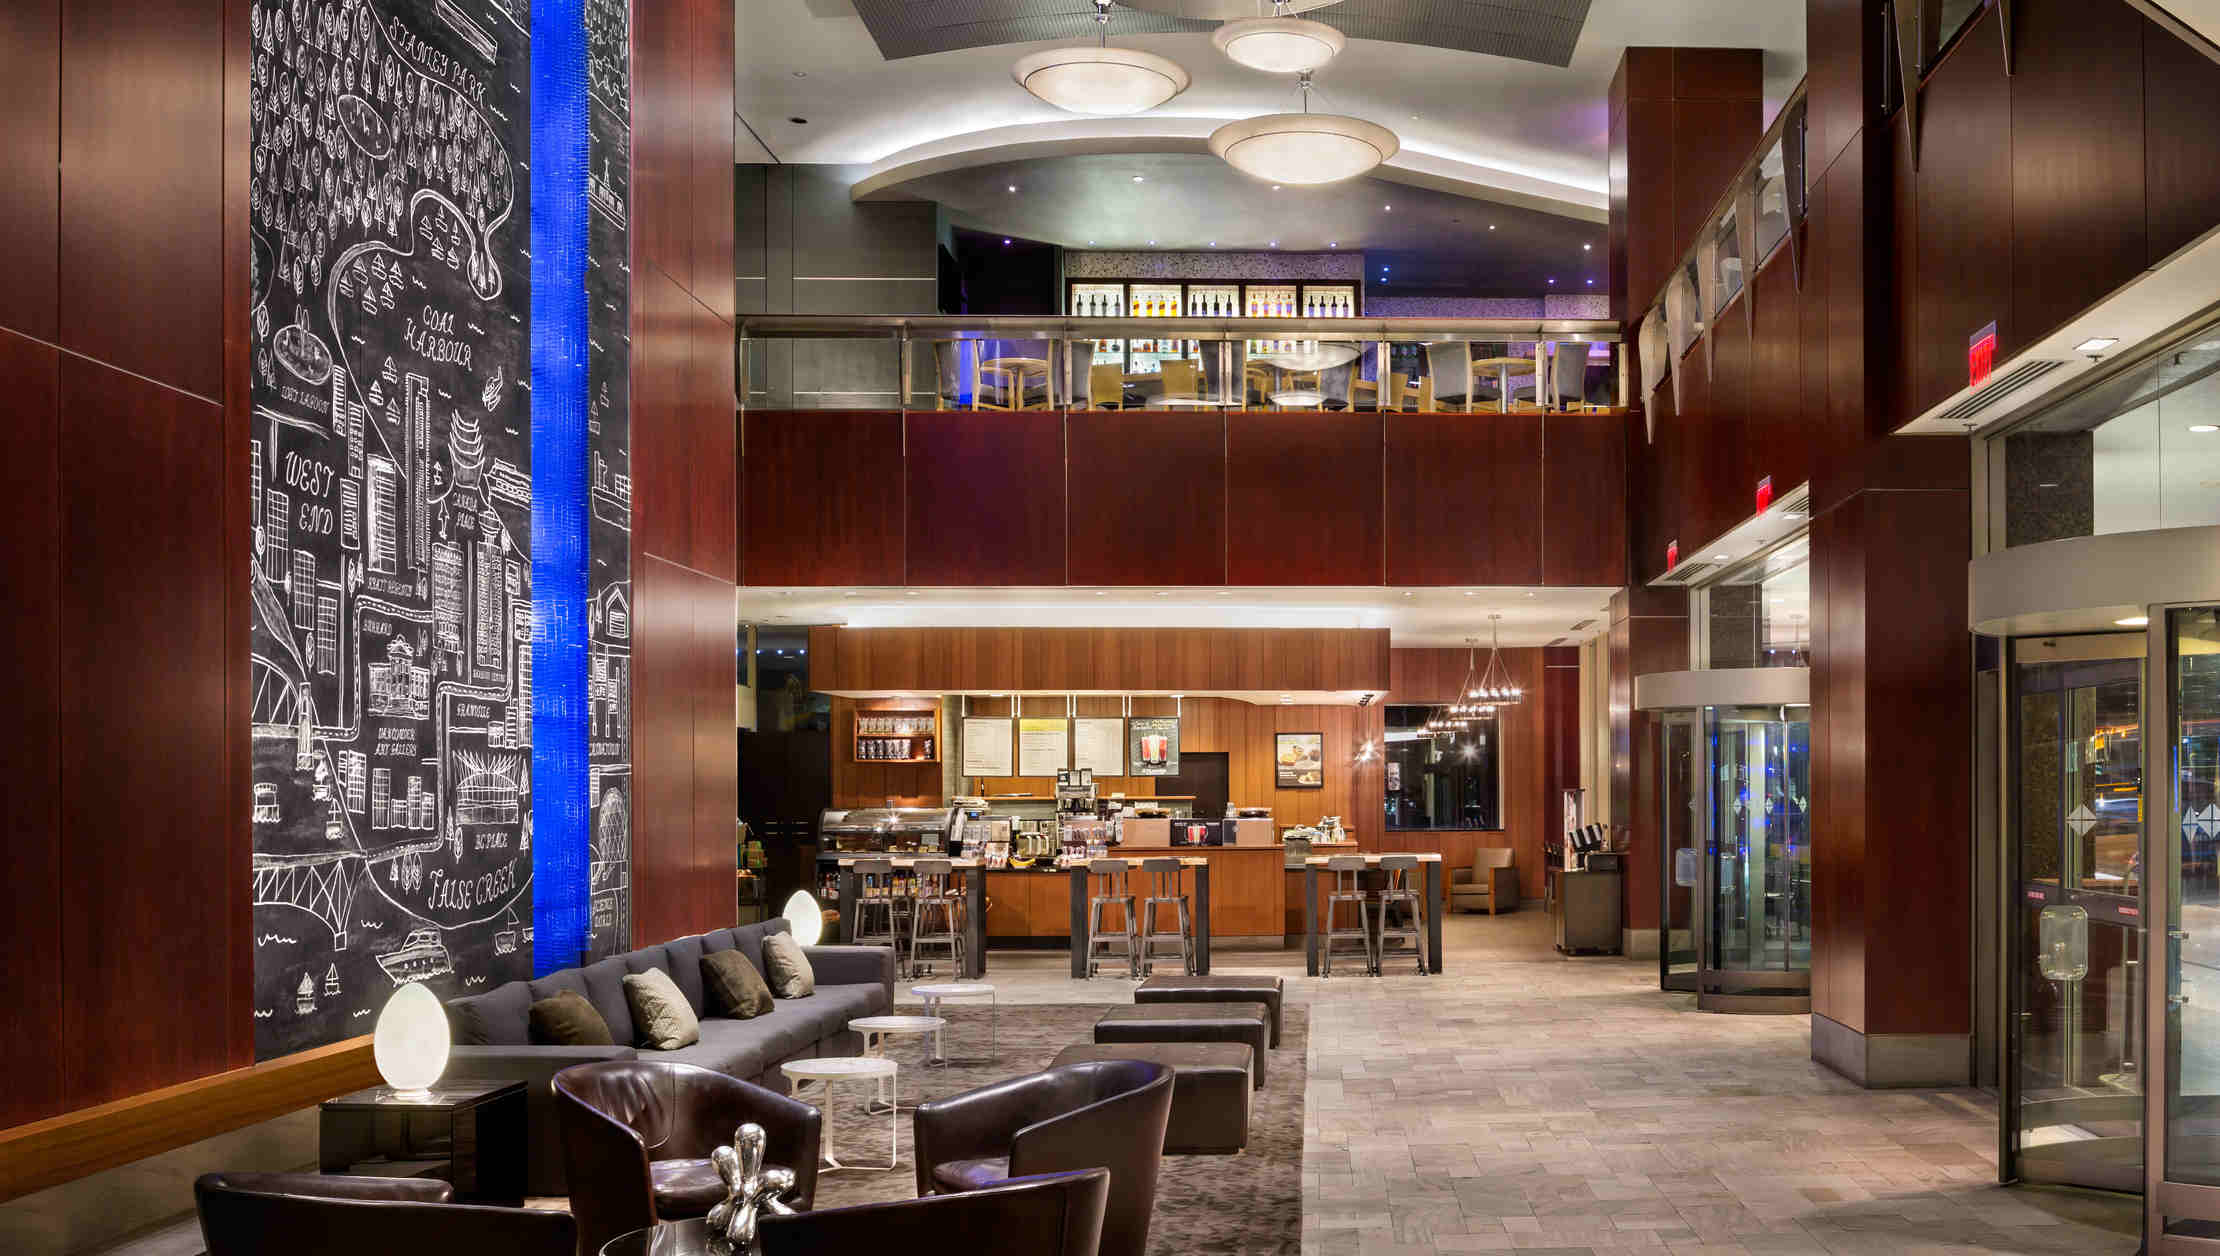 Photo of Hyatt Regency Vancouver lobby with overlooking bar, lounge and breakfast area